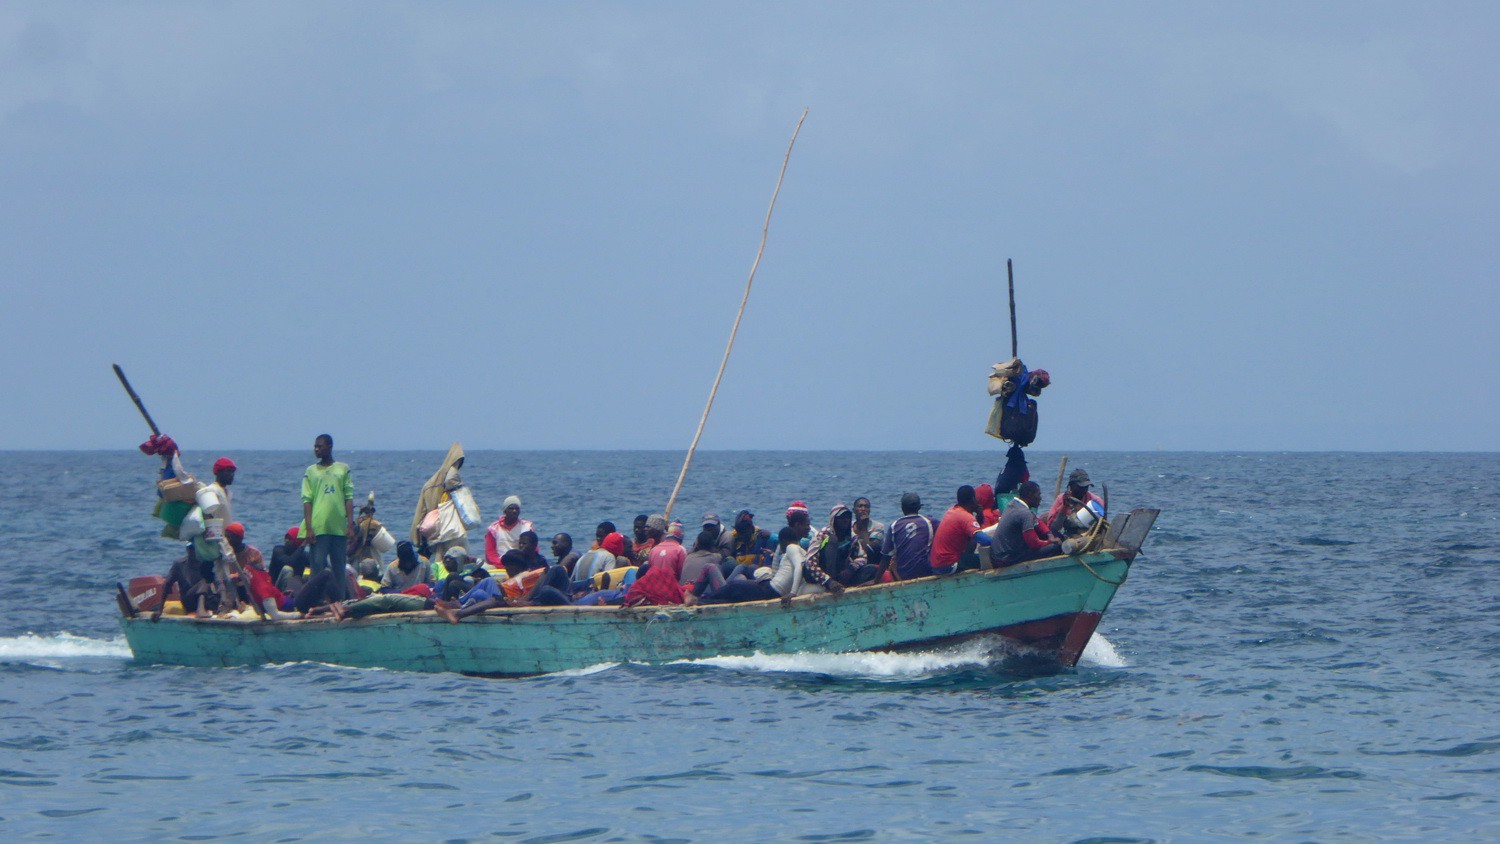 Crowded little boat on the Indian Ocean